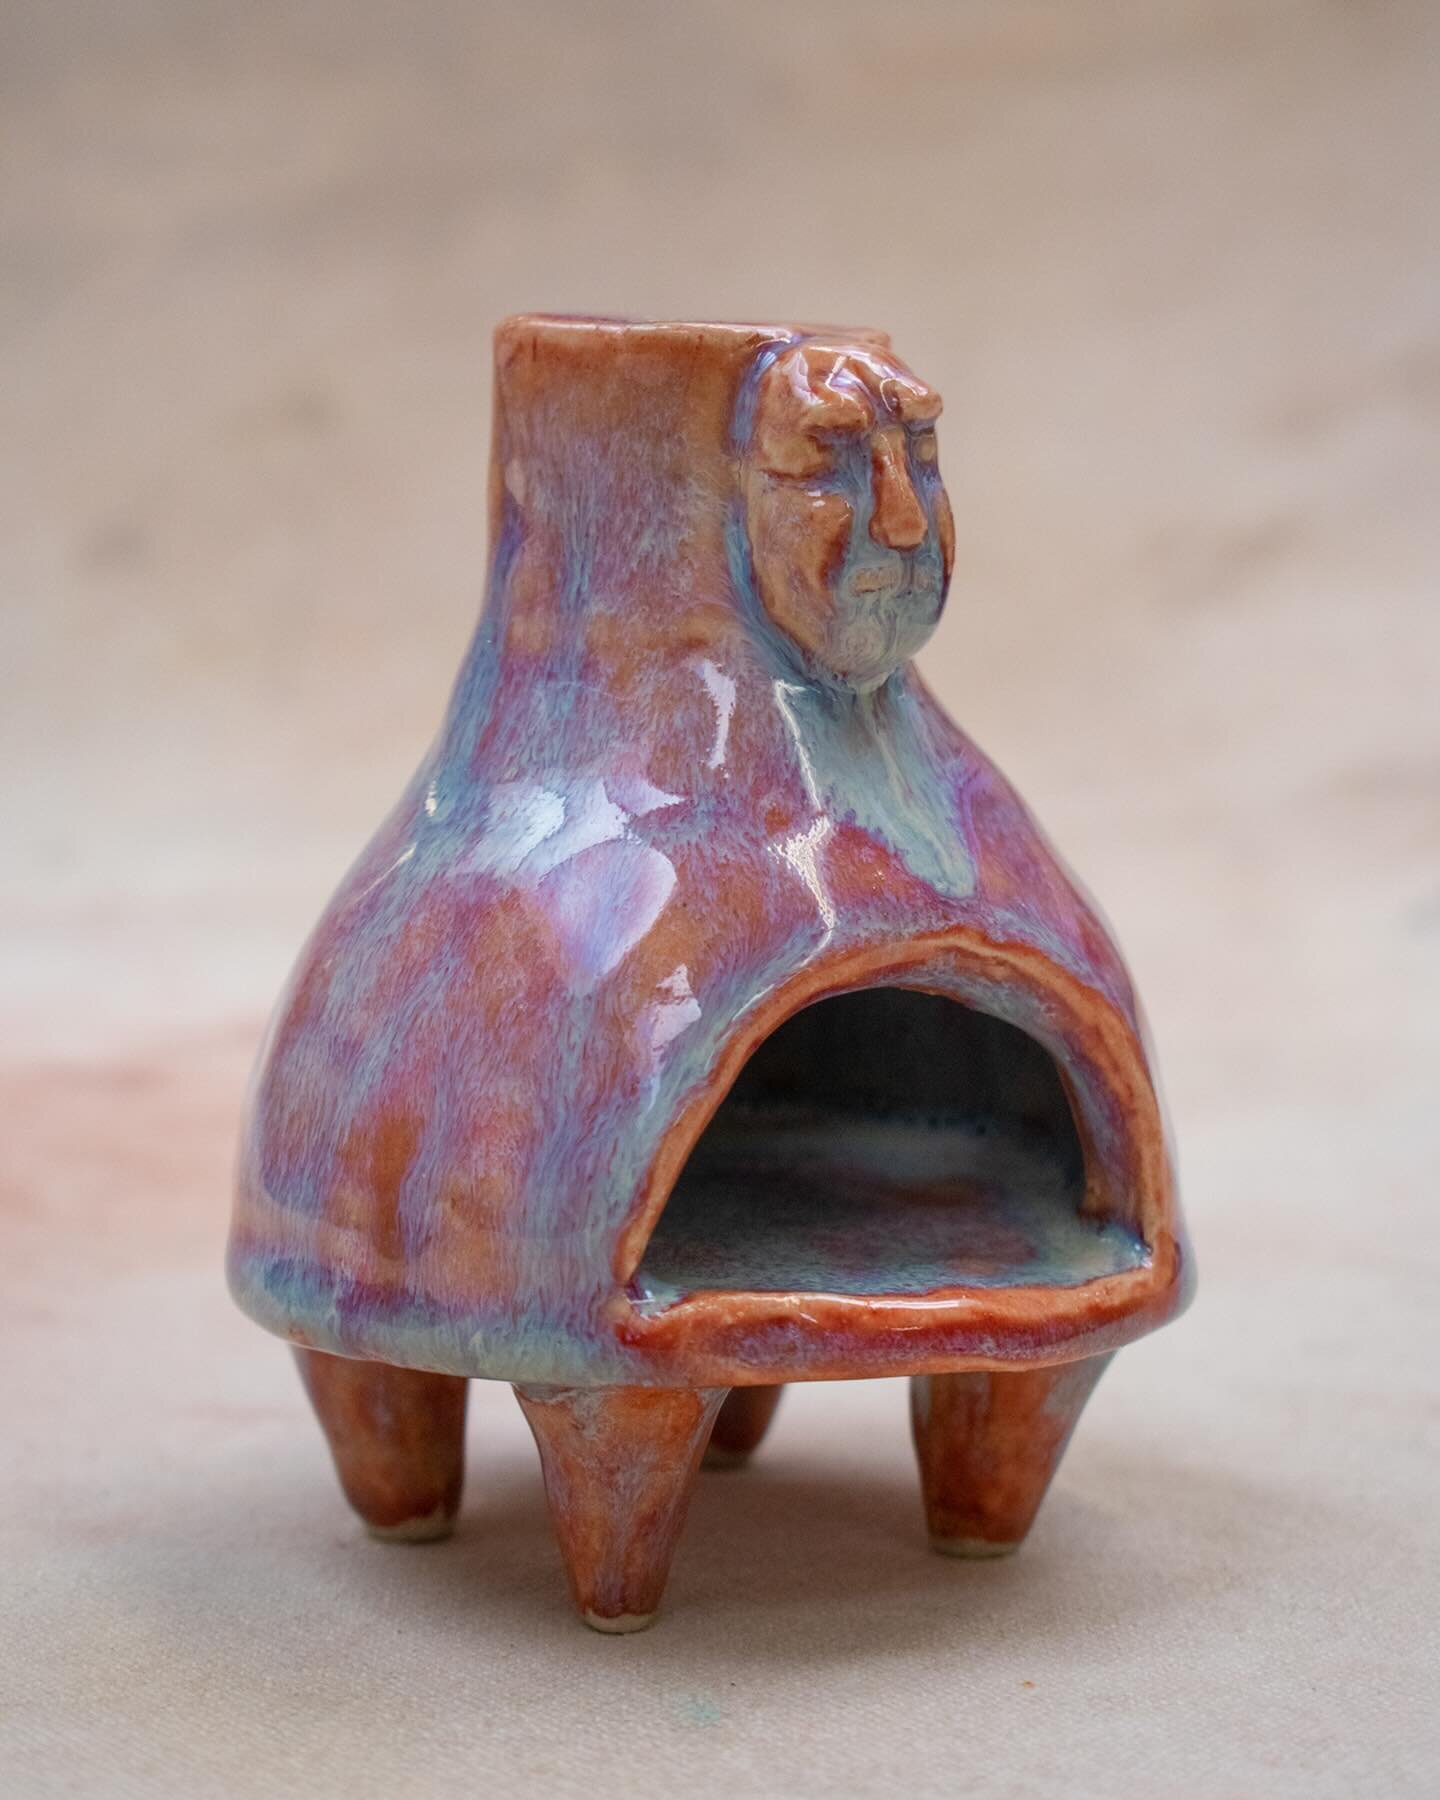 First firing at @pastlivesllc complete! This guy makes me so happy, even though he looks a little sad.

What should I name him?!

And look at that GLAZE! It&rsquo;s called &ldquo;kimchi&rdquo; I had been eyeing it at @georgiesceramic for months. Fina